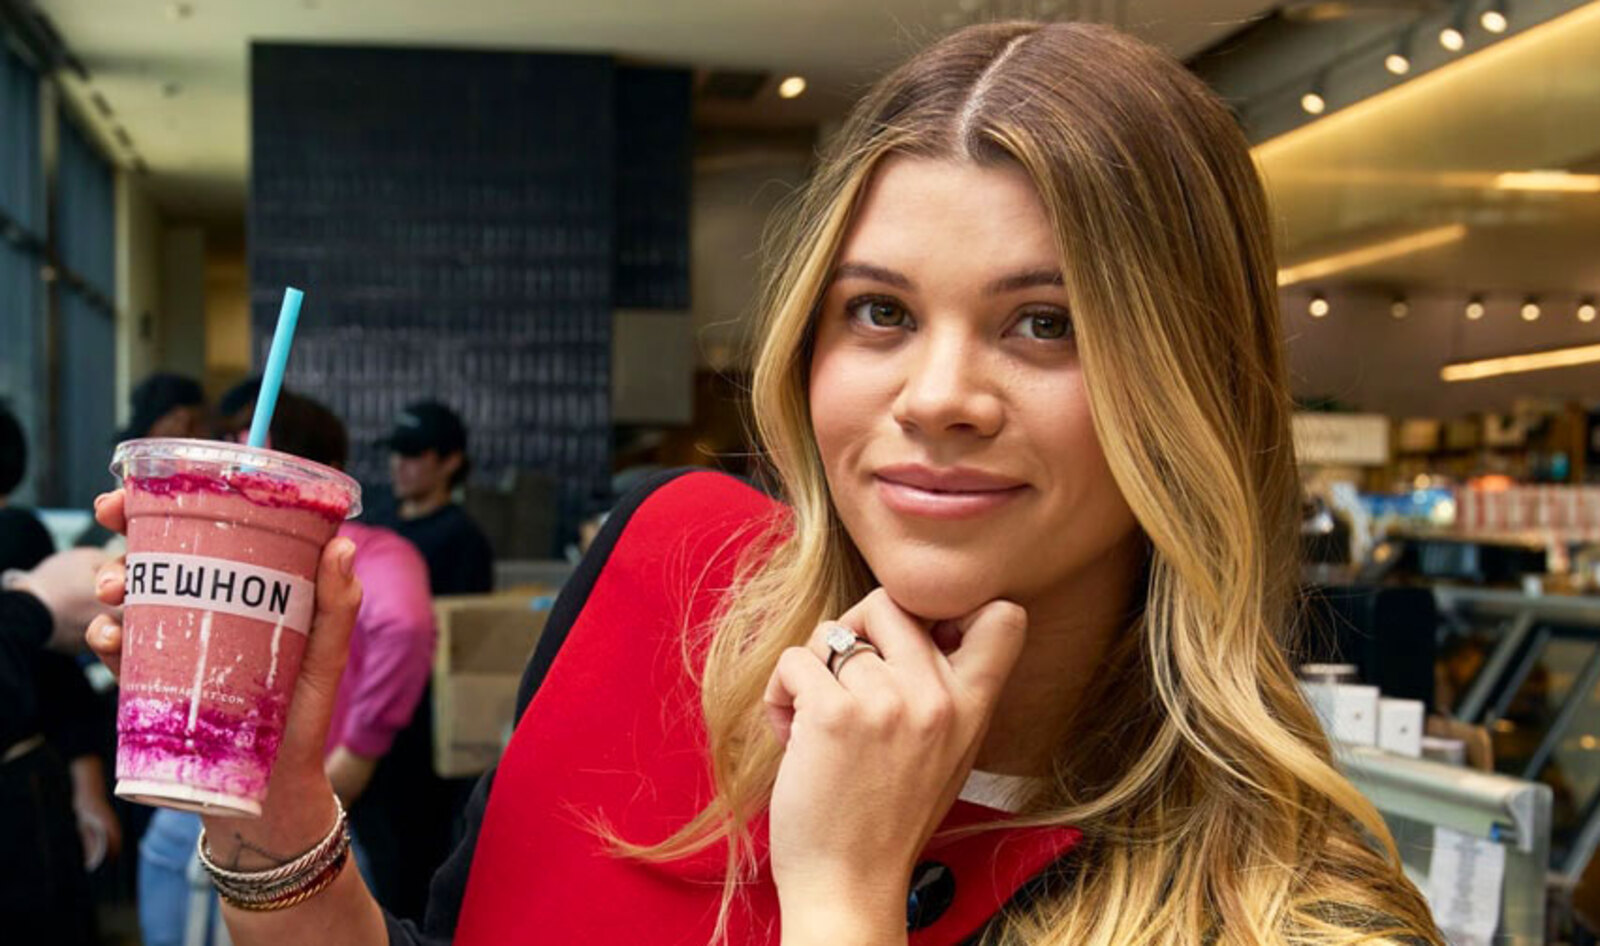 Cow Colostrum: What Is the Weird Ingredient in Sofia Richie’s $21 Erewhon Smoothie?